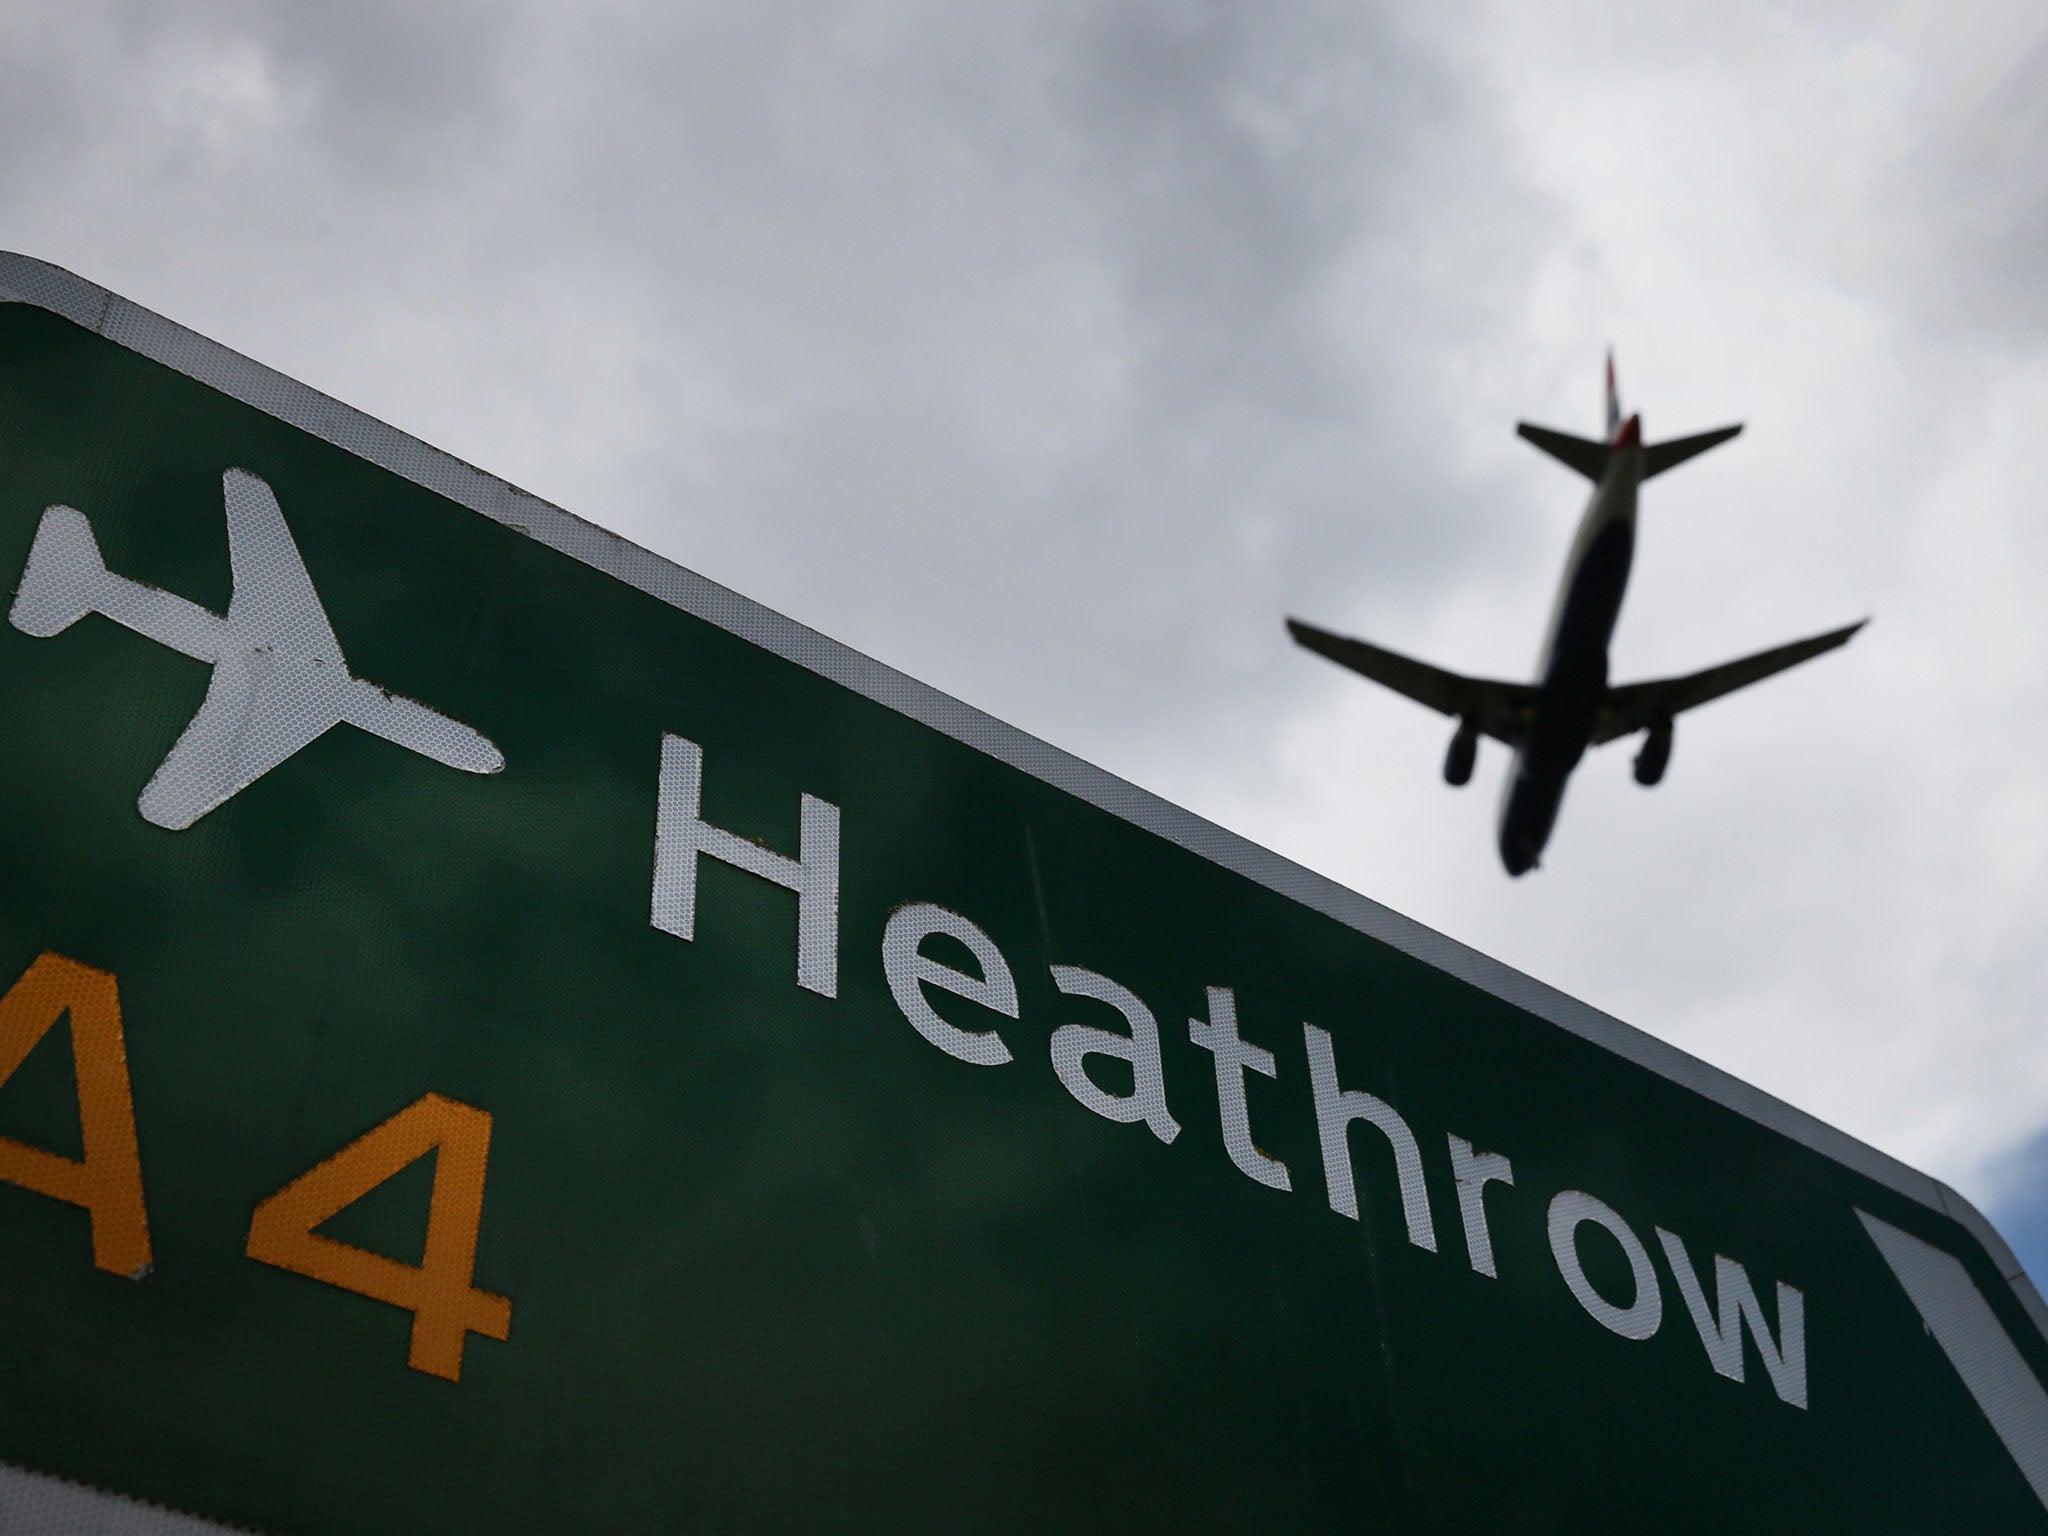 LONDON, ENGLAND - AUGUST 11: An airliner comes in to land at Heathrow Airport on August 11, 2014 in London, England. Heathrow is the busiest airport in the United Kingdom and the third busiest in the world. The airport's operator BAA wants to build a third runway to cope with increased demand.